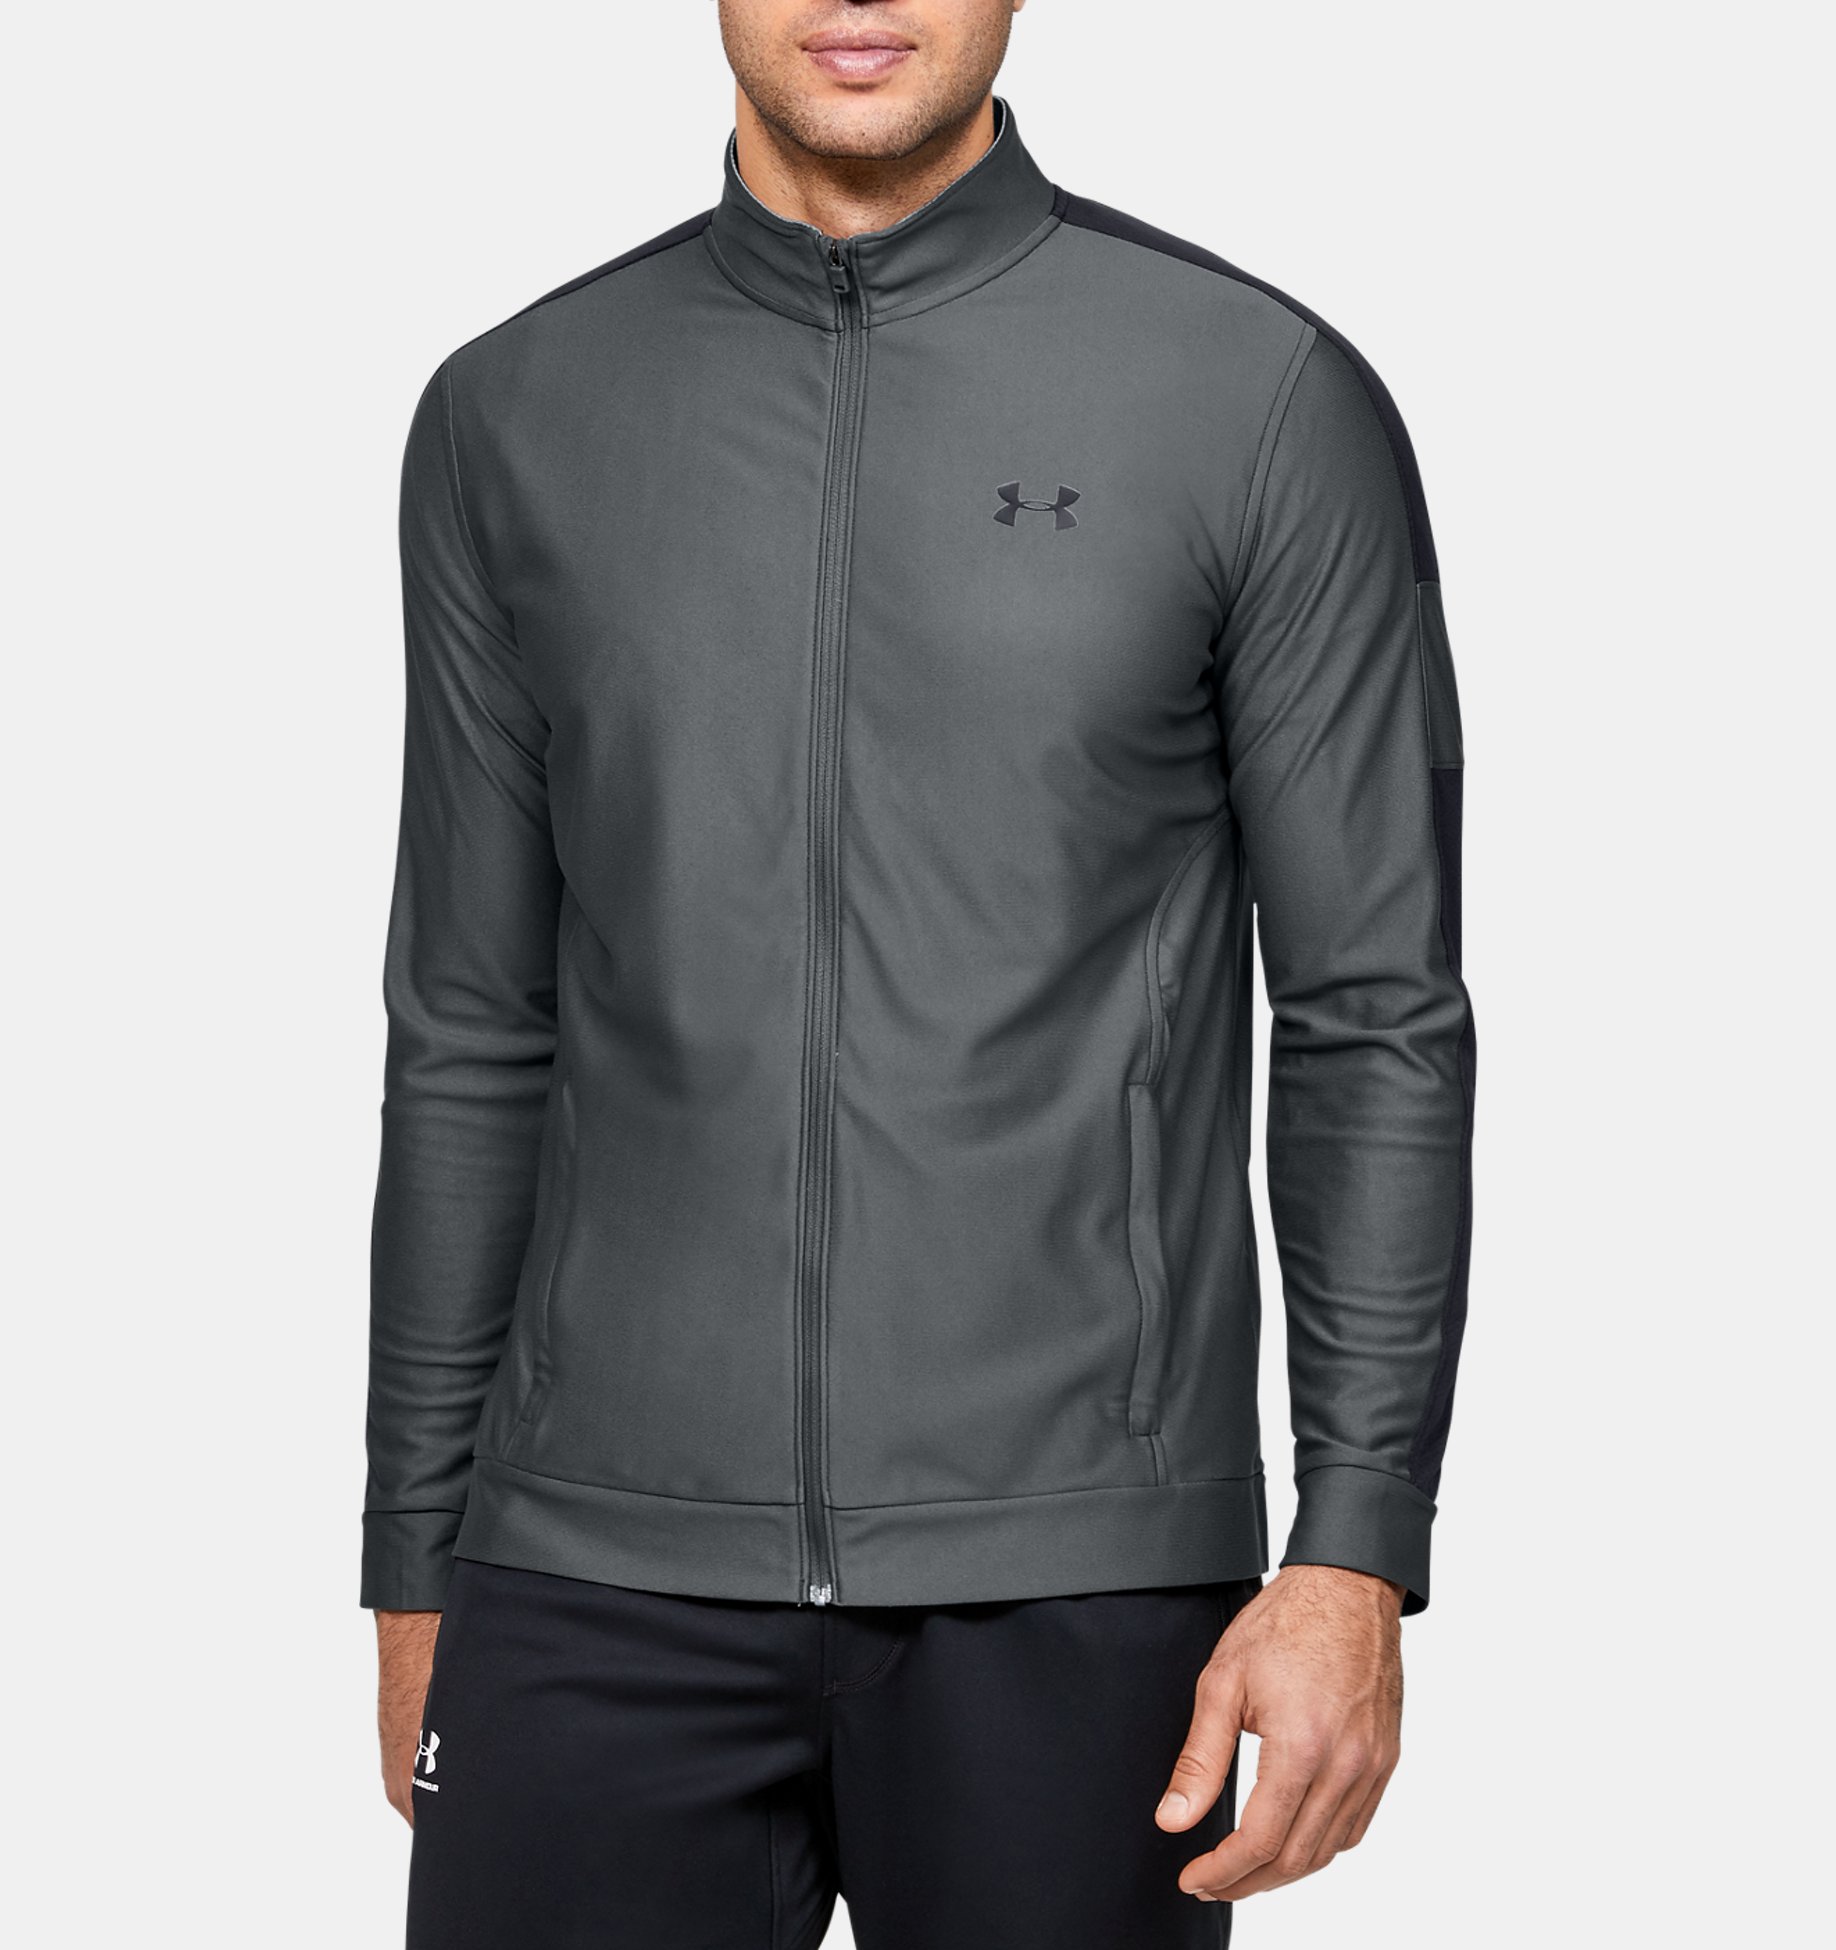 Under Armour Outlet Sale: Up to 50% off + Extra 25% off $75 or more